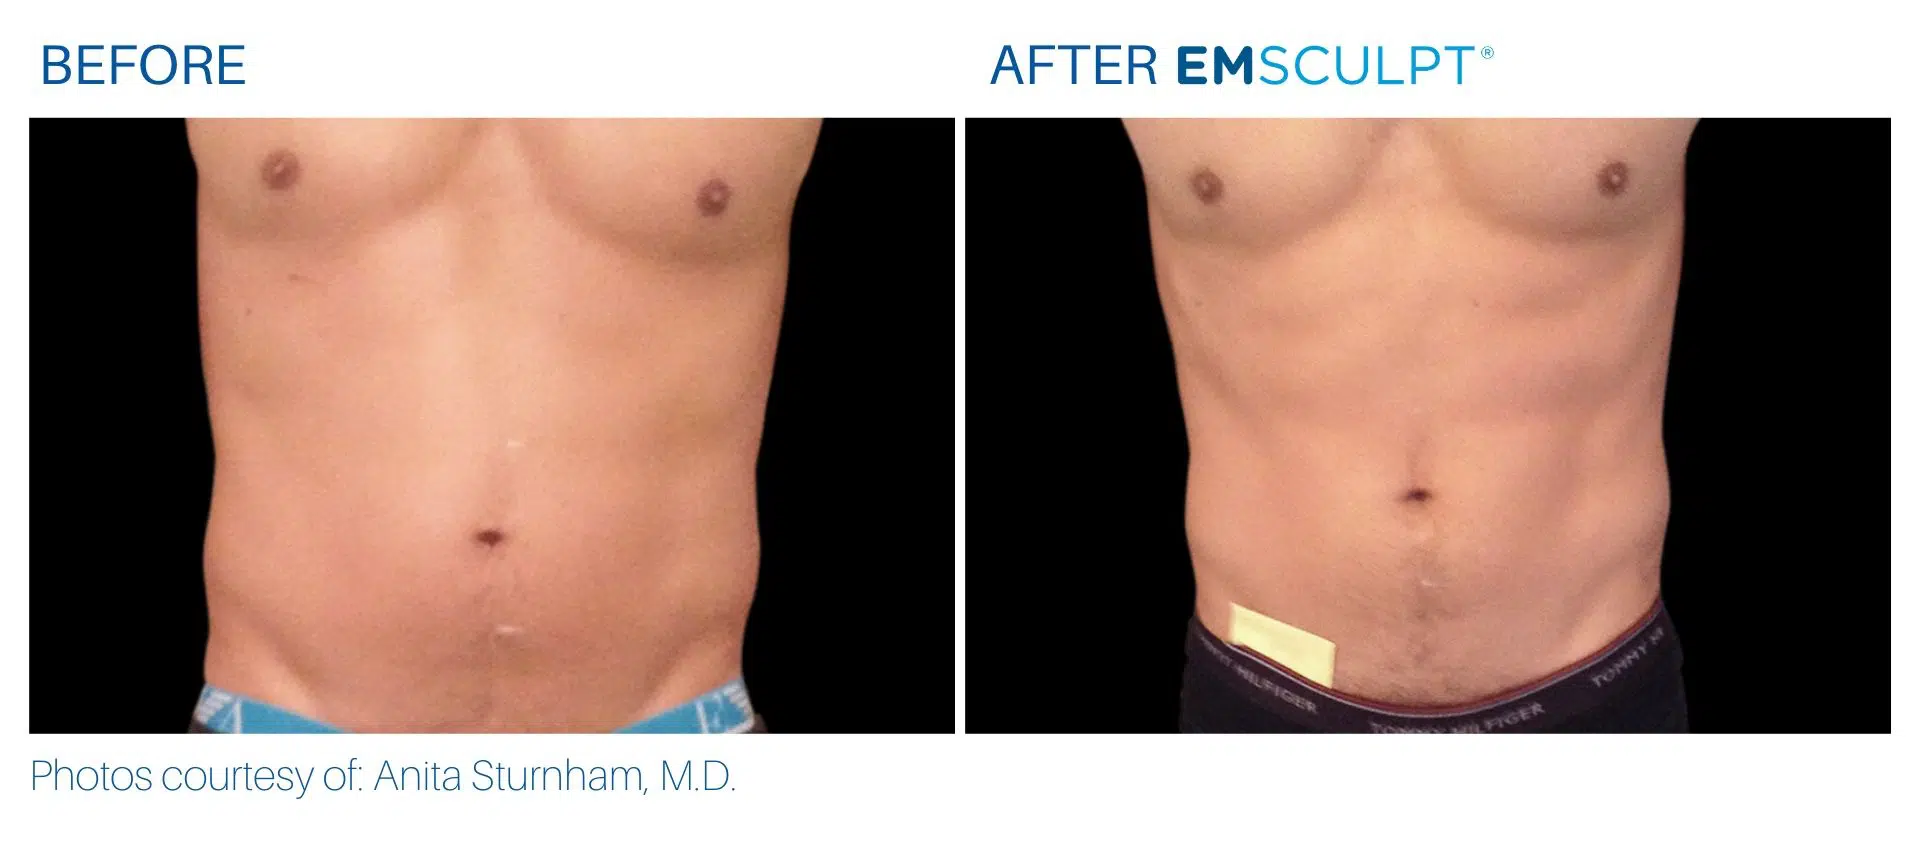 Emsculpt in Yonkers Body Morph MD before and after images